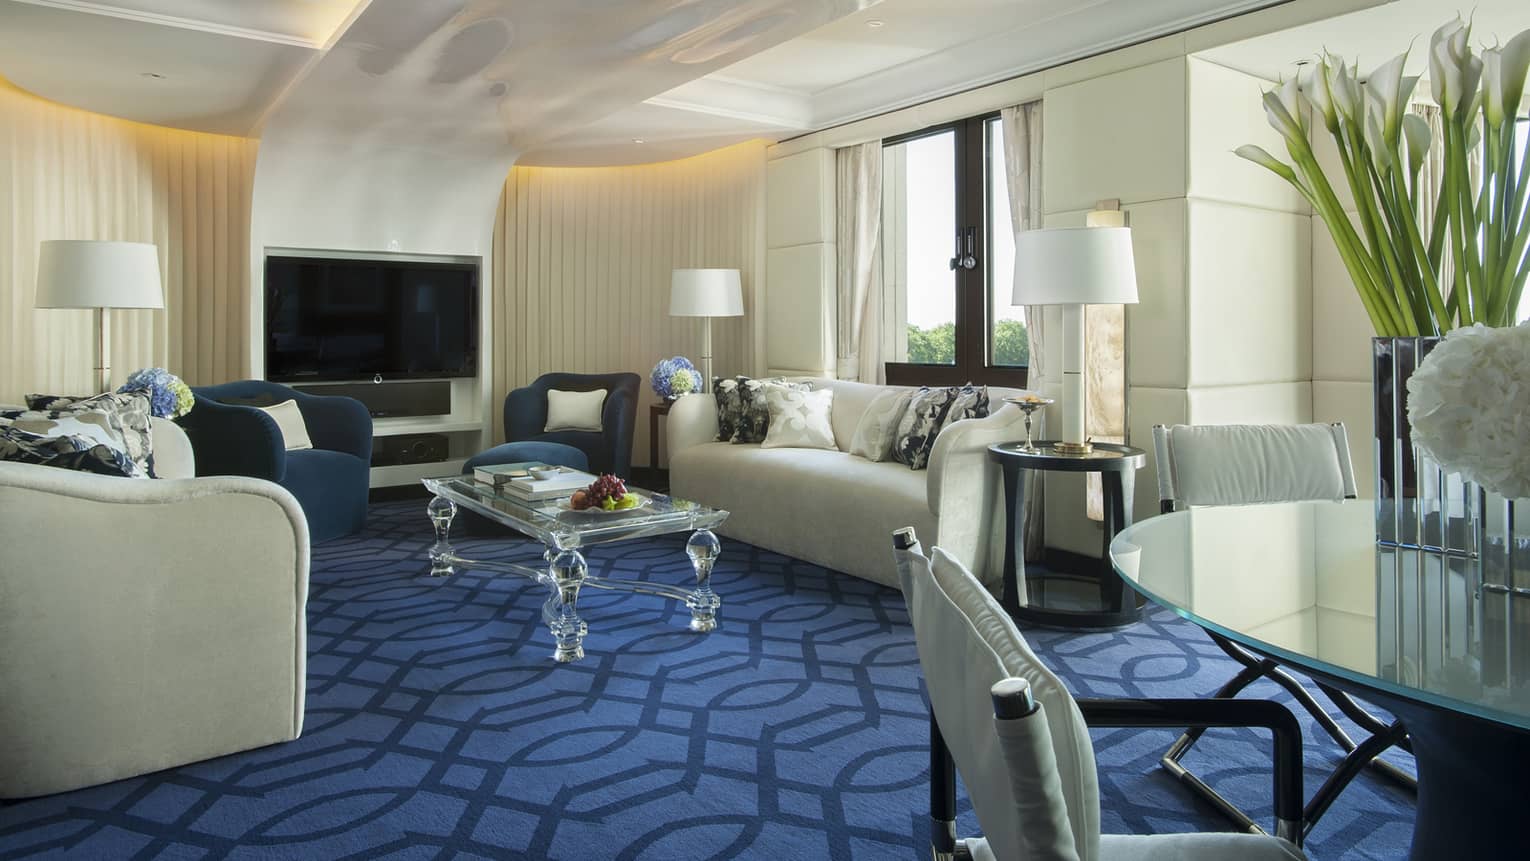 The Blue Suite at Four Seasons London Park Lane in Mayfair features an opulent living area with a vibrant blue and cream color scheme. The room includes two plush blue armchairs and a large cream sofa, complemented by stylish throw pillows. A modern glass coffee table holds decorative items and books, adding a personal touch. Large floor lamps and a sleek flat-screen TV are also part of the decor. Floor-to-ceiling windows provide ample natural light and a view of the green surroundings. The room's luxury is accentuated by tall cream drapes and a patterned blue carpet.